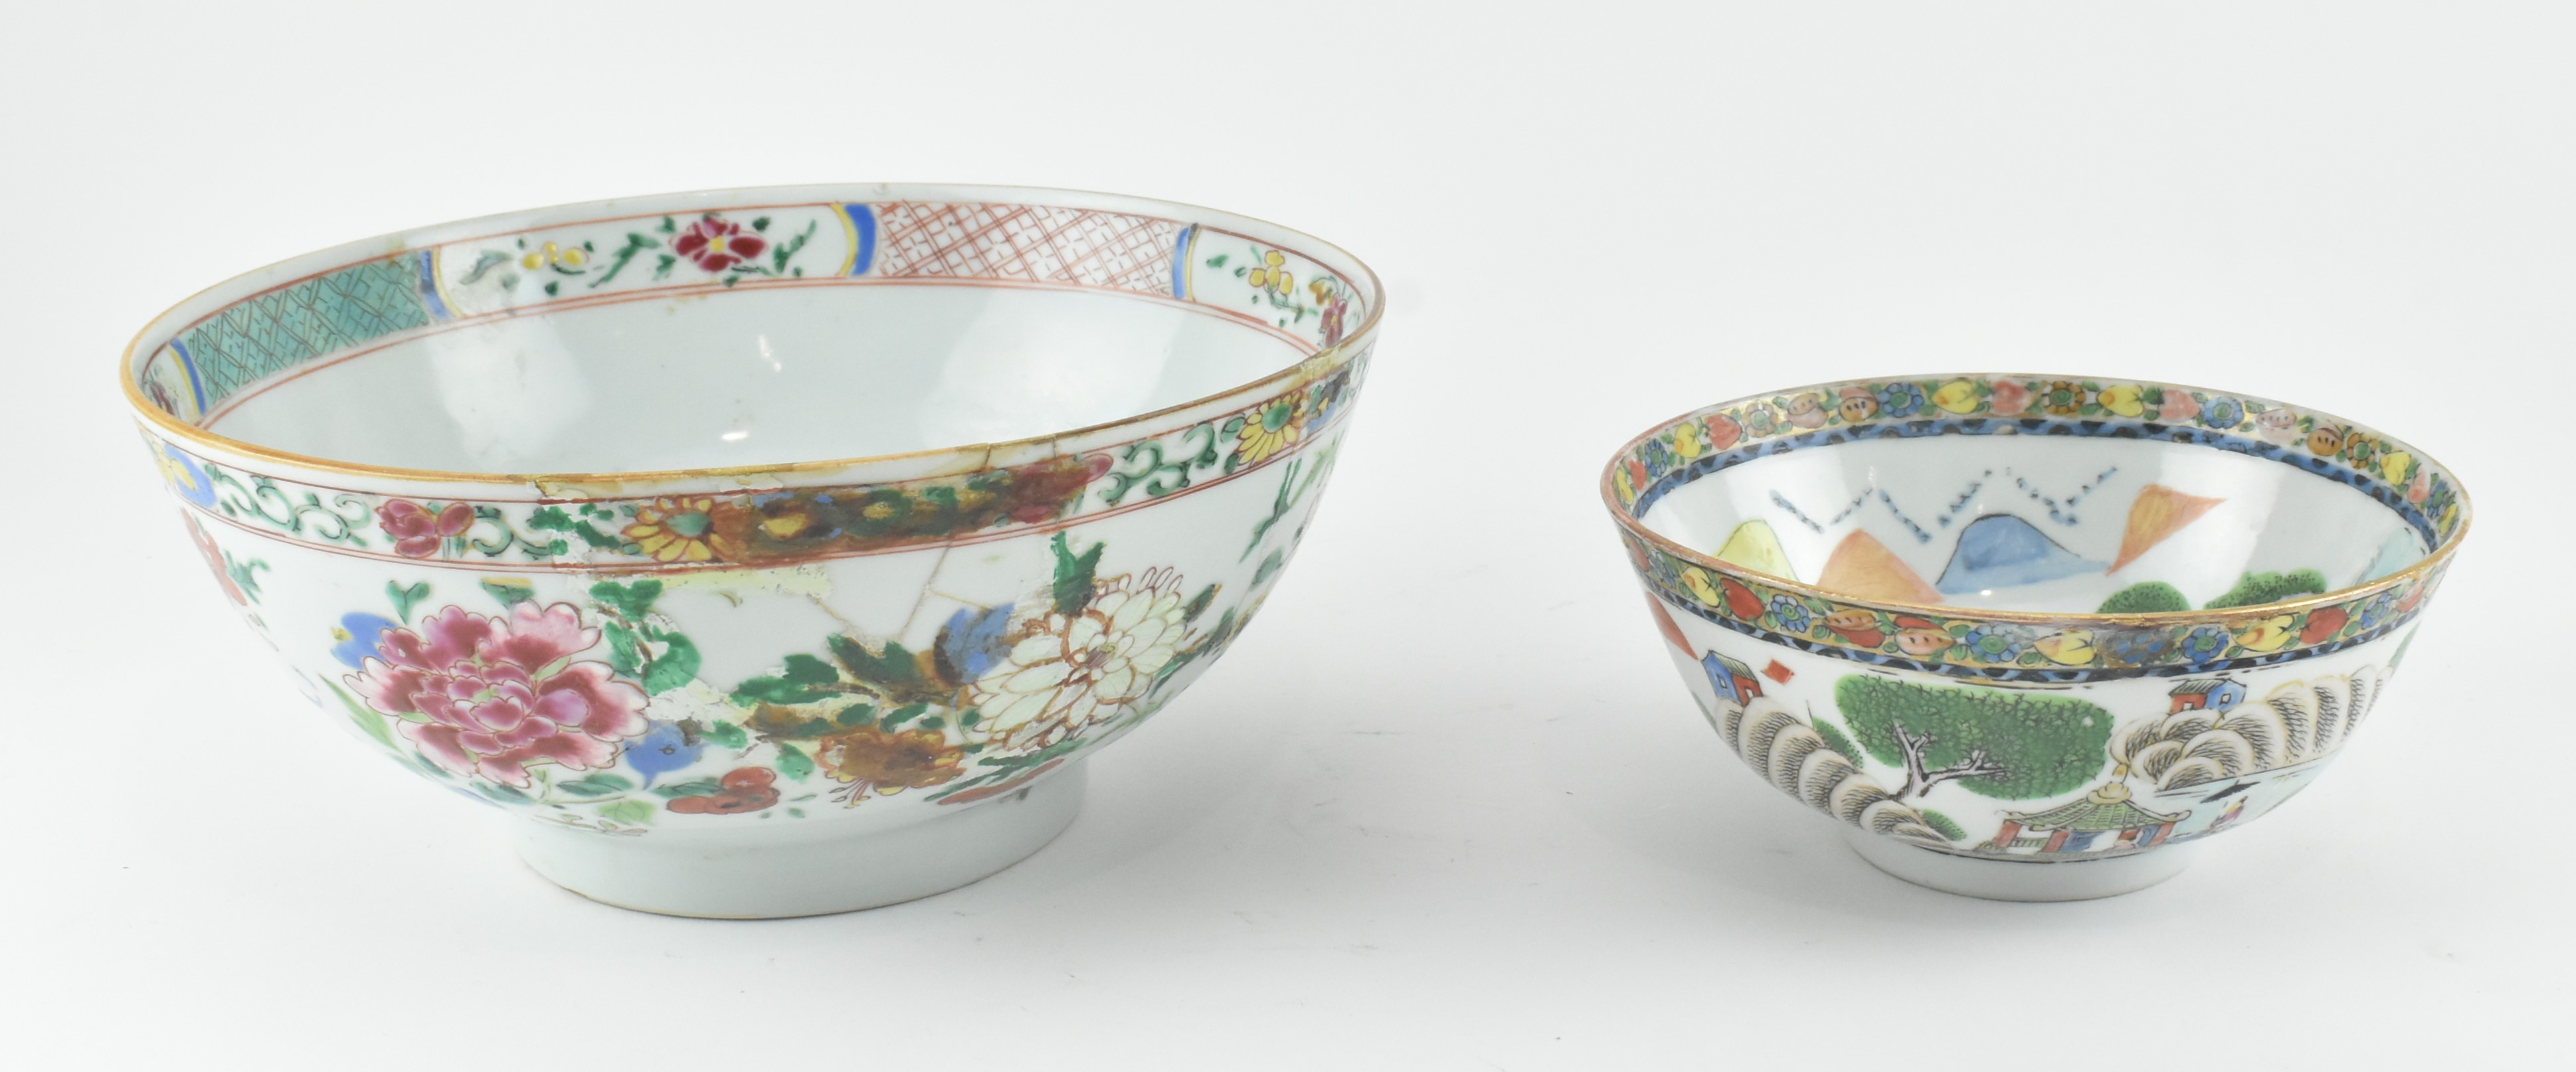 TWO QING DYNASTY FAMILLE ROSE BOWLS 清 粉彩碗